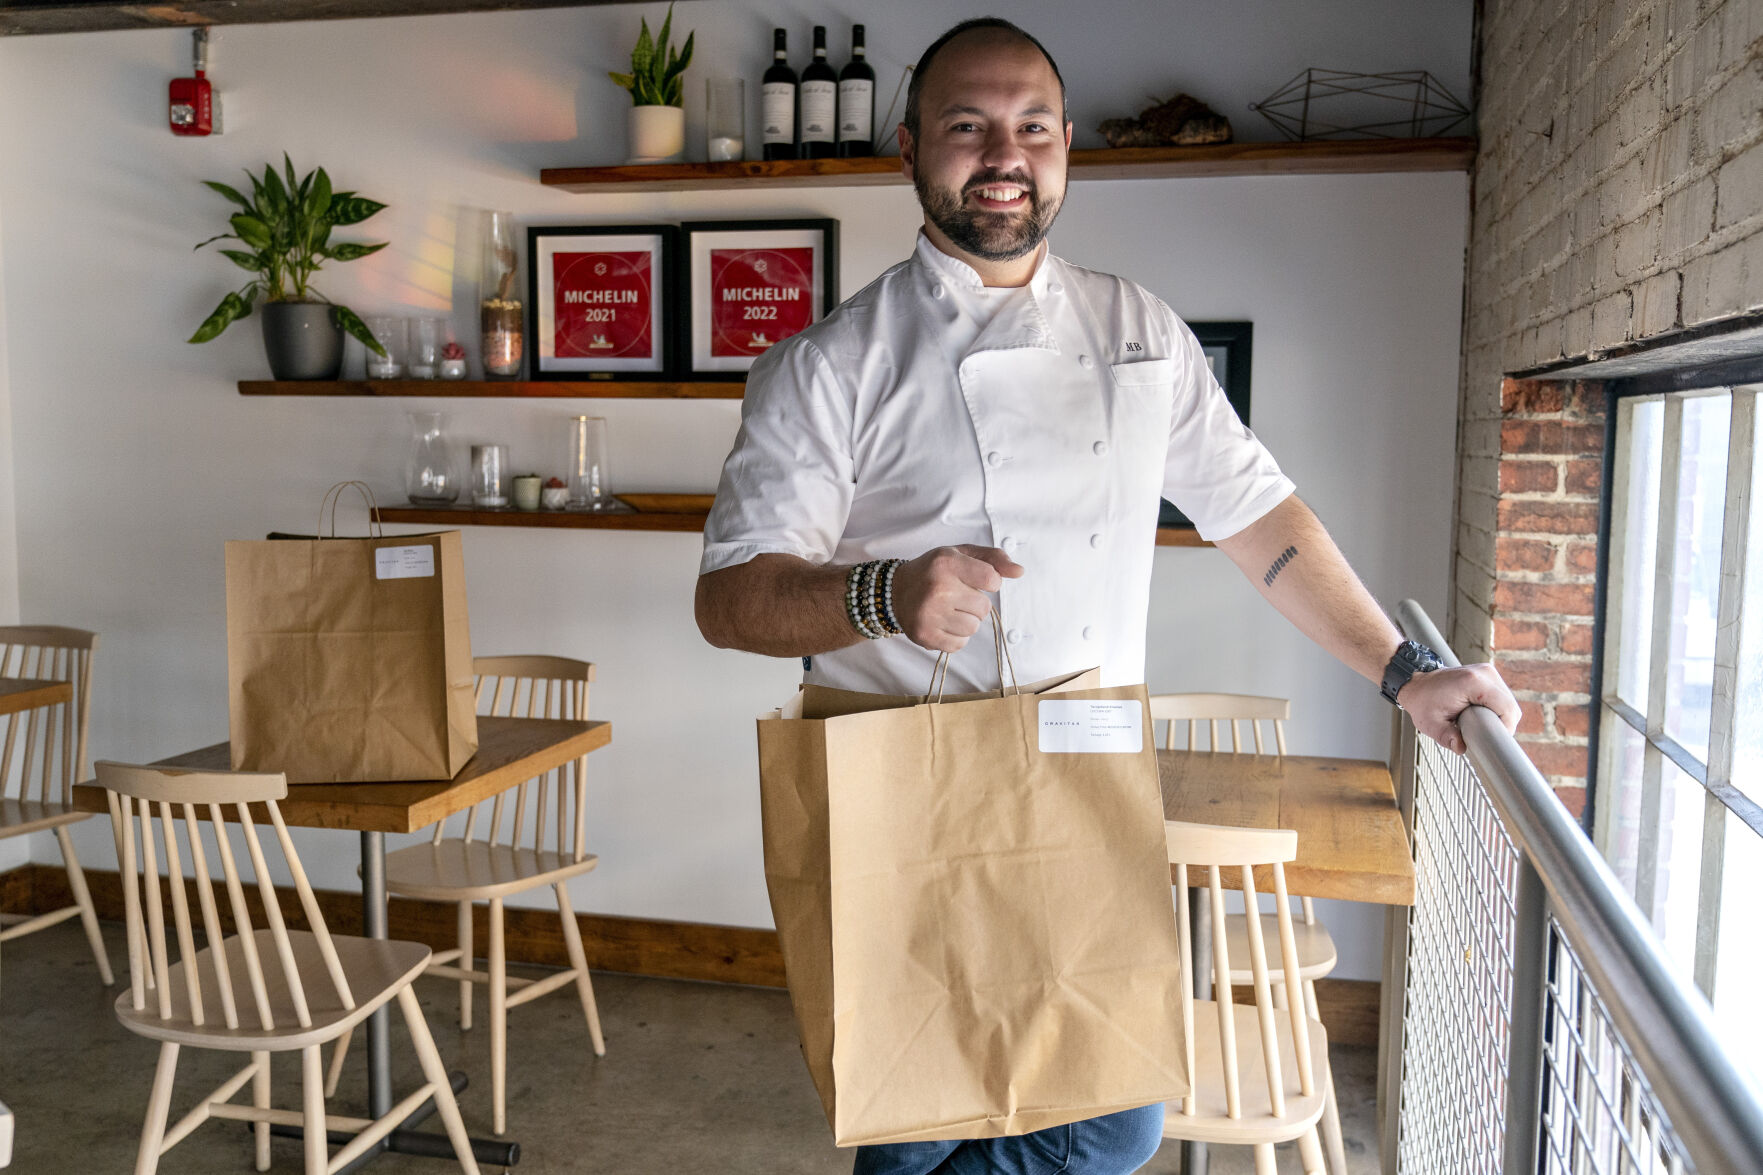 <p>Matt Baker, chef and owner of Gravitas, poses for a portrait inside the restaurant, Tuesday, Feb. 14, 2023, in Washington. Gravitas has a subscription service offering a monthly meal for two. (AP Photo/Jacquelyn Martin)</p>   PHOTO CREDIT: Jacquelyn Martin 